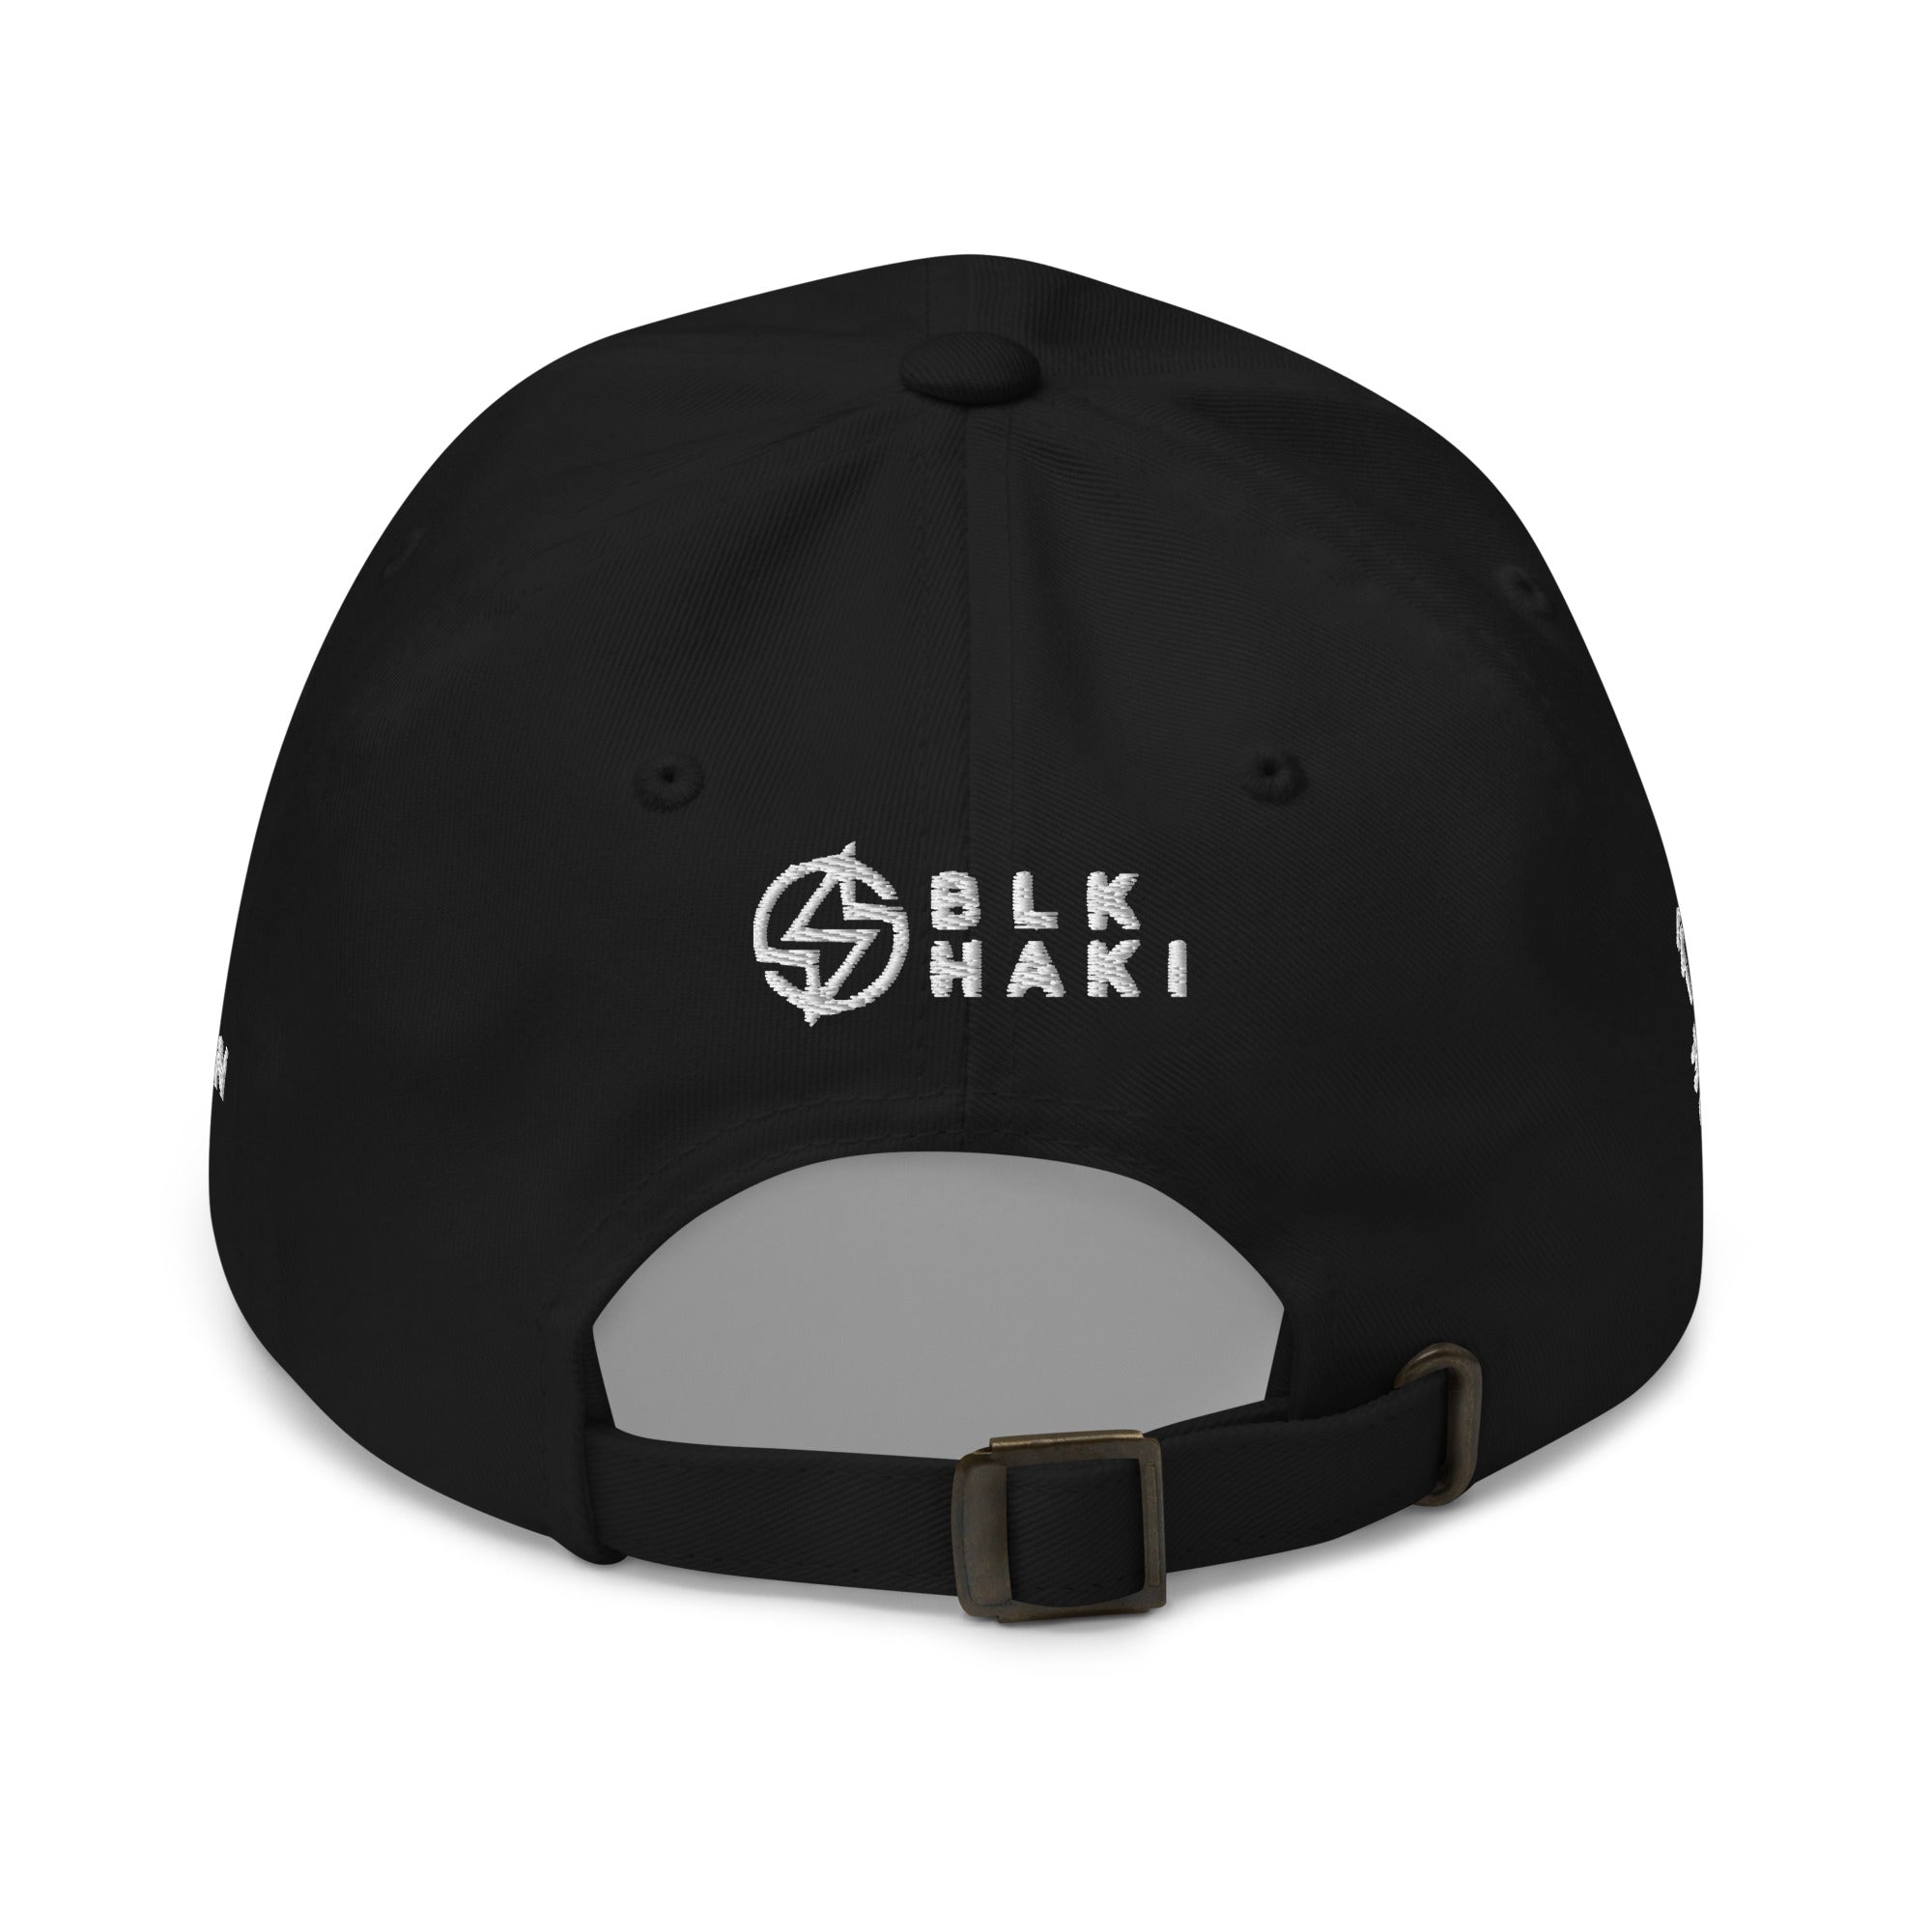 Black dad hat with white embroidery